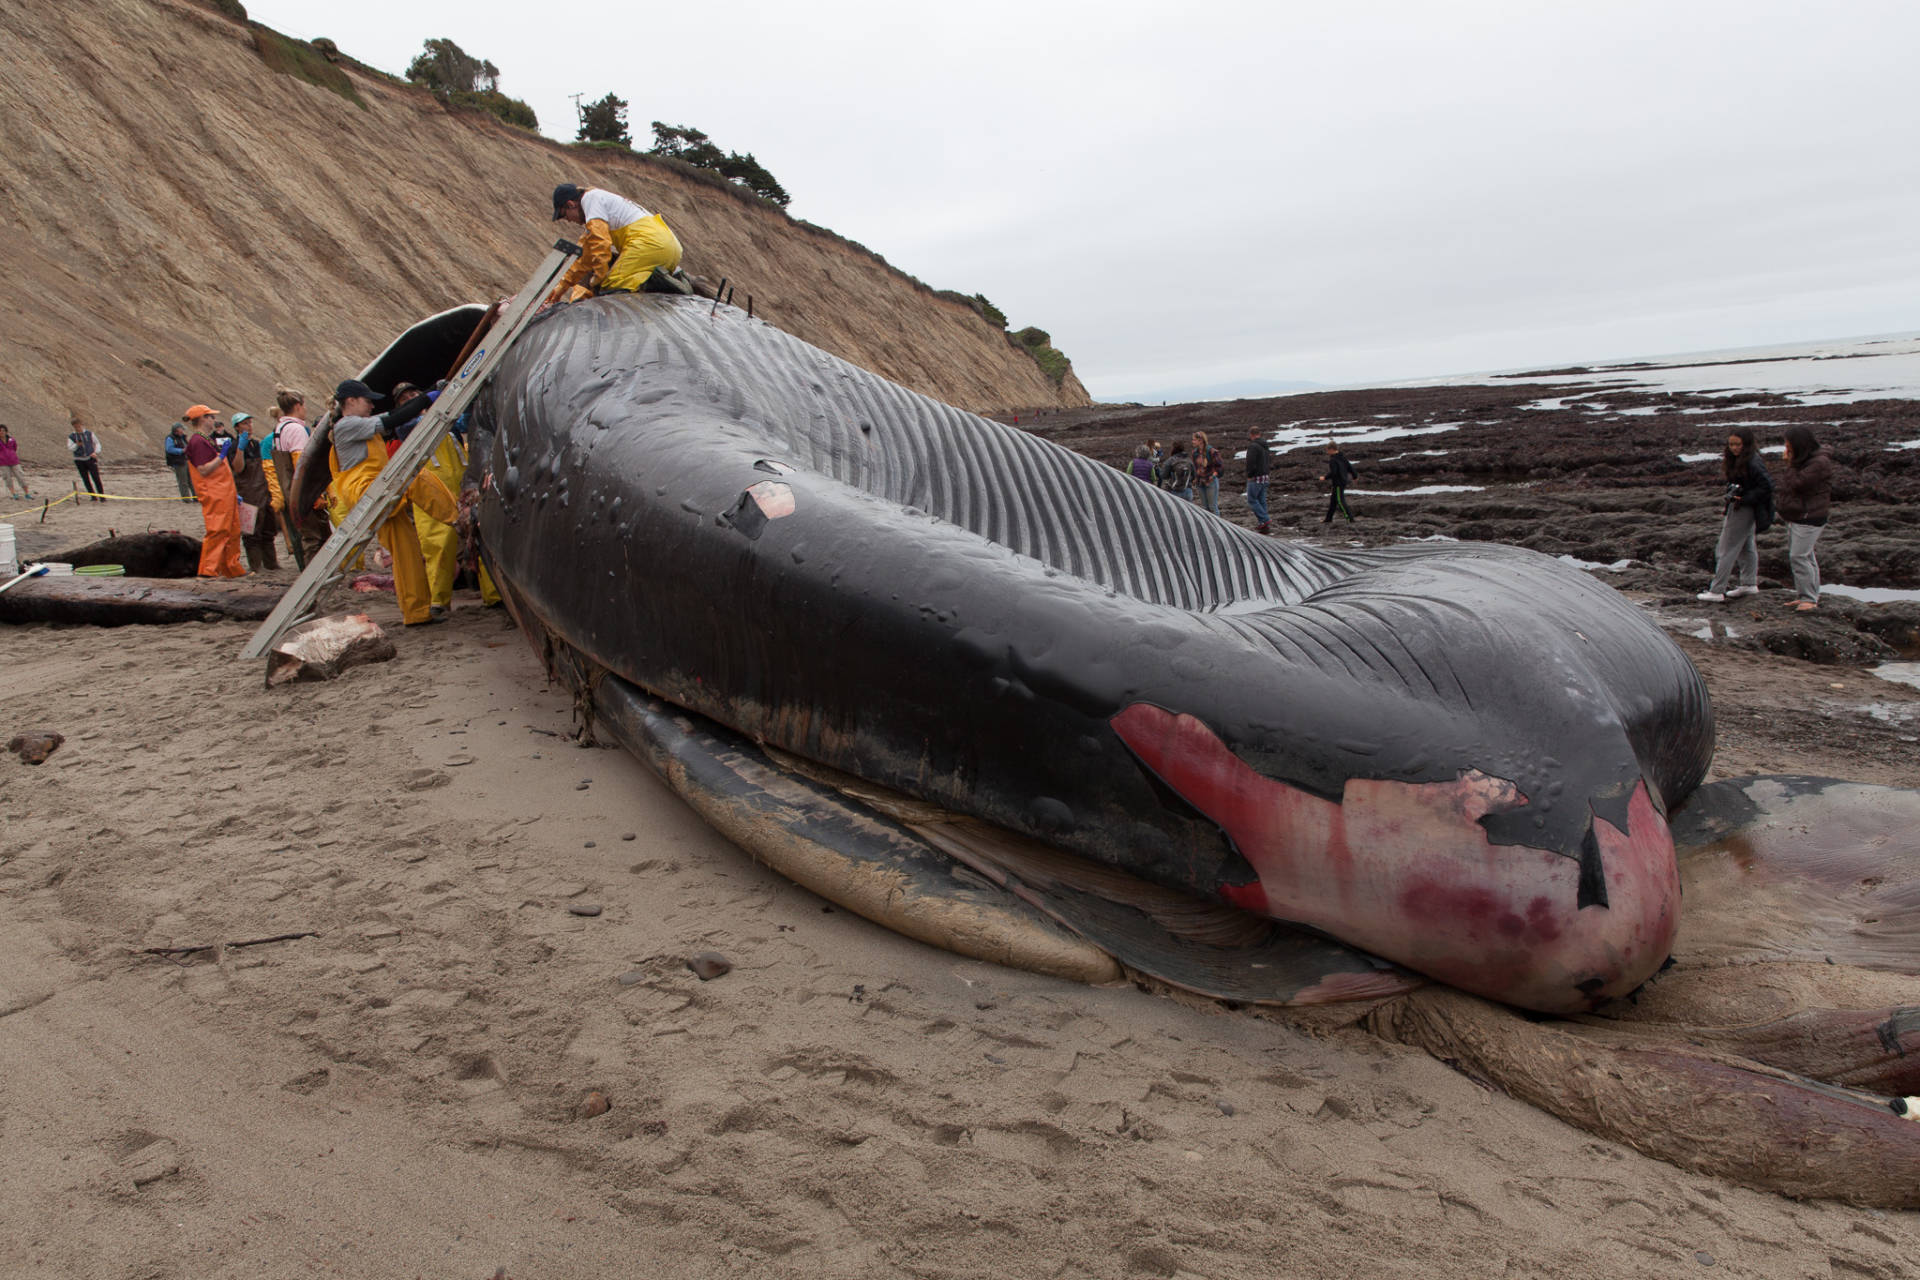 A 79-foot long blue whale washed up on a Bolinas beach in May after she was struck by a ship. Brian Lee Fisher